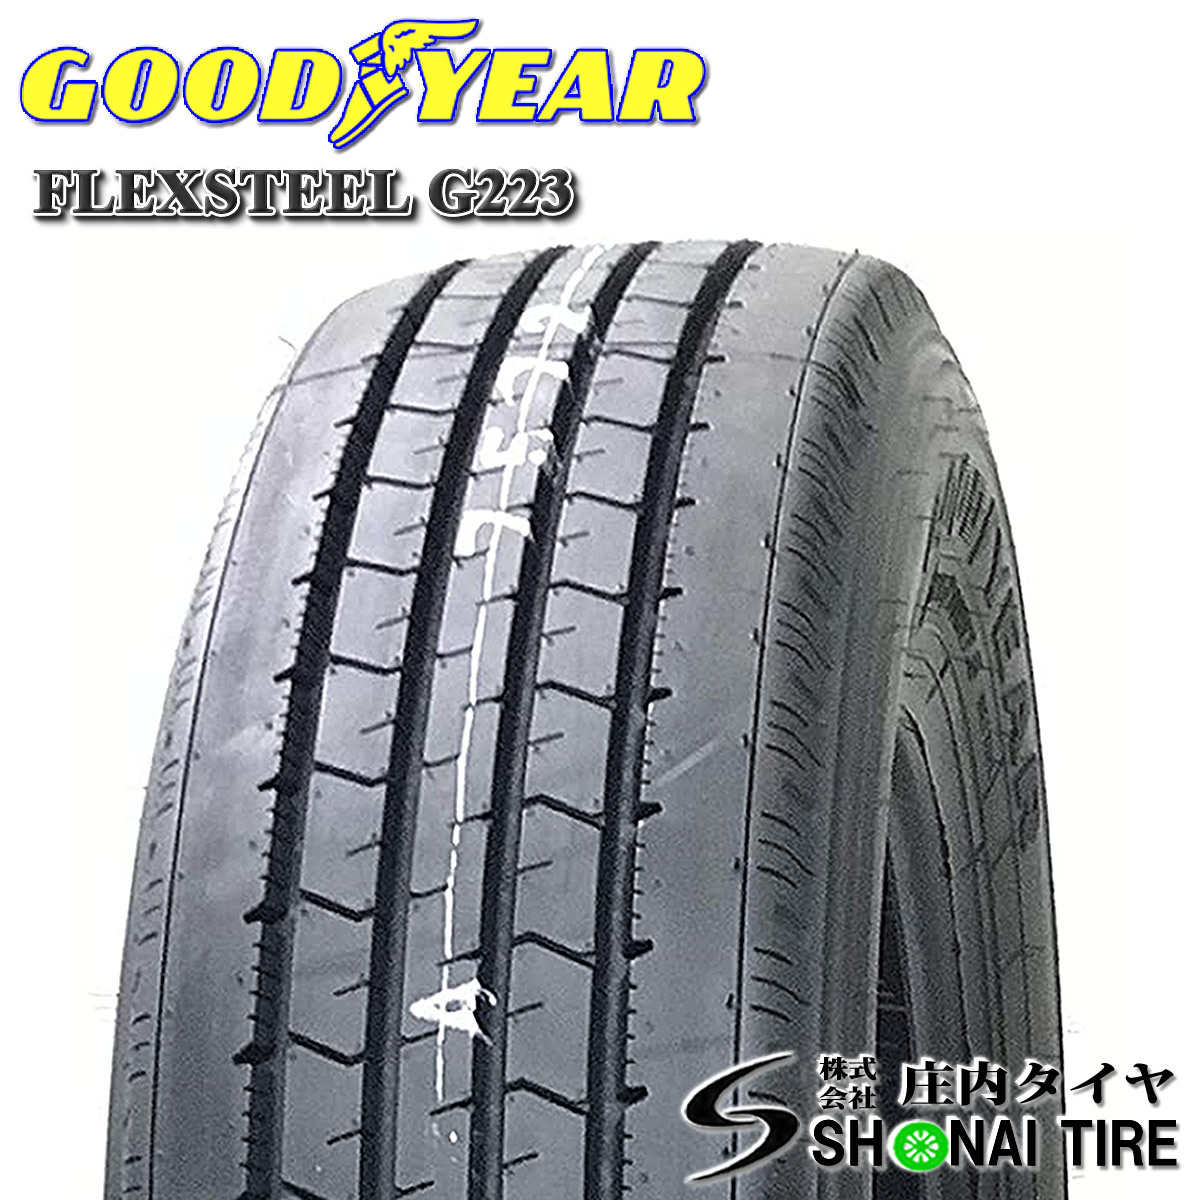  stock necessary verification Dyna for Goodyear FLEX STEEL G223 205/80R17.5 LT iron wheel attaching 17.5×5.25 +113 4ps.@ price summer NO,GY011SH363-4